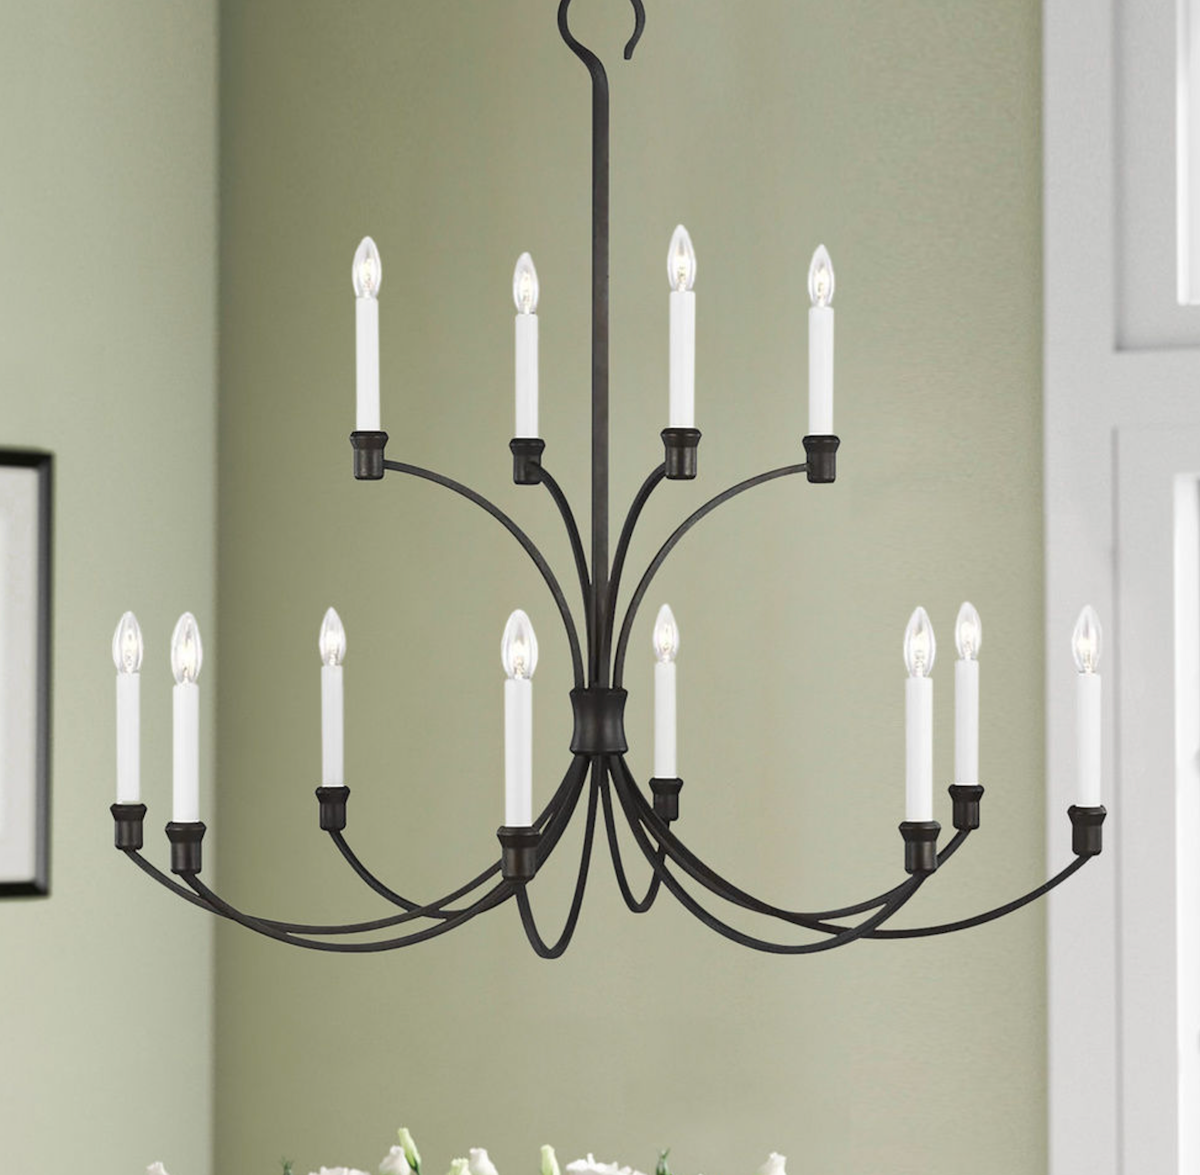 Westerly 12L Large Chandelier - CC10712SMS